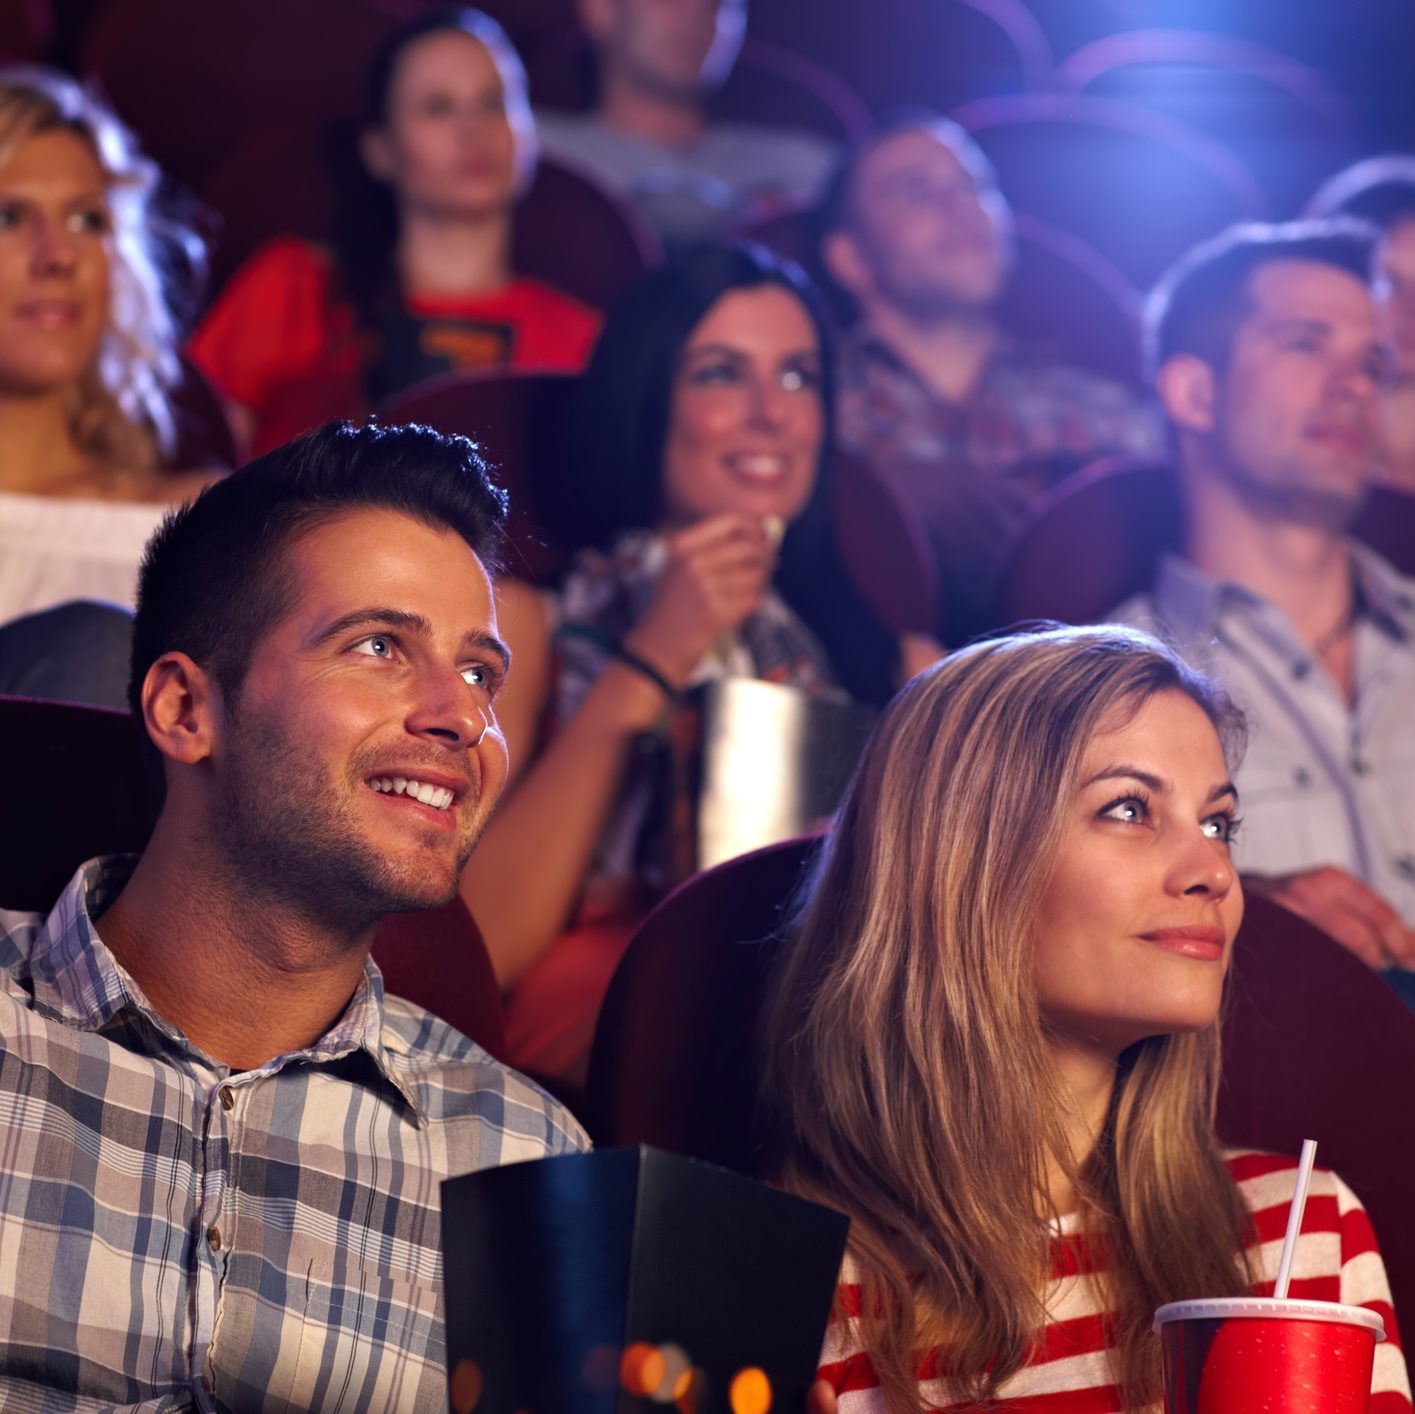 Regal Summer Movie Express offers $1 movies this summer